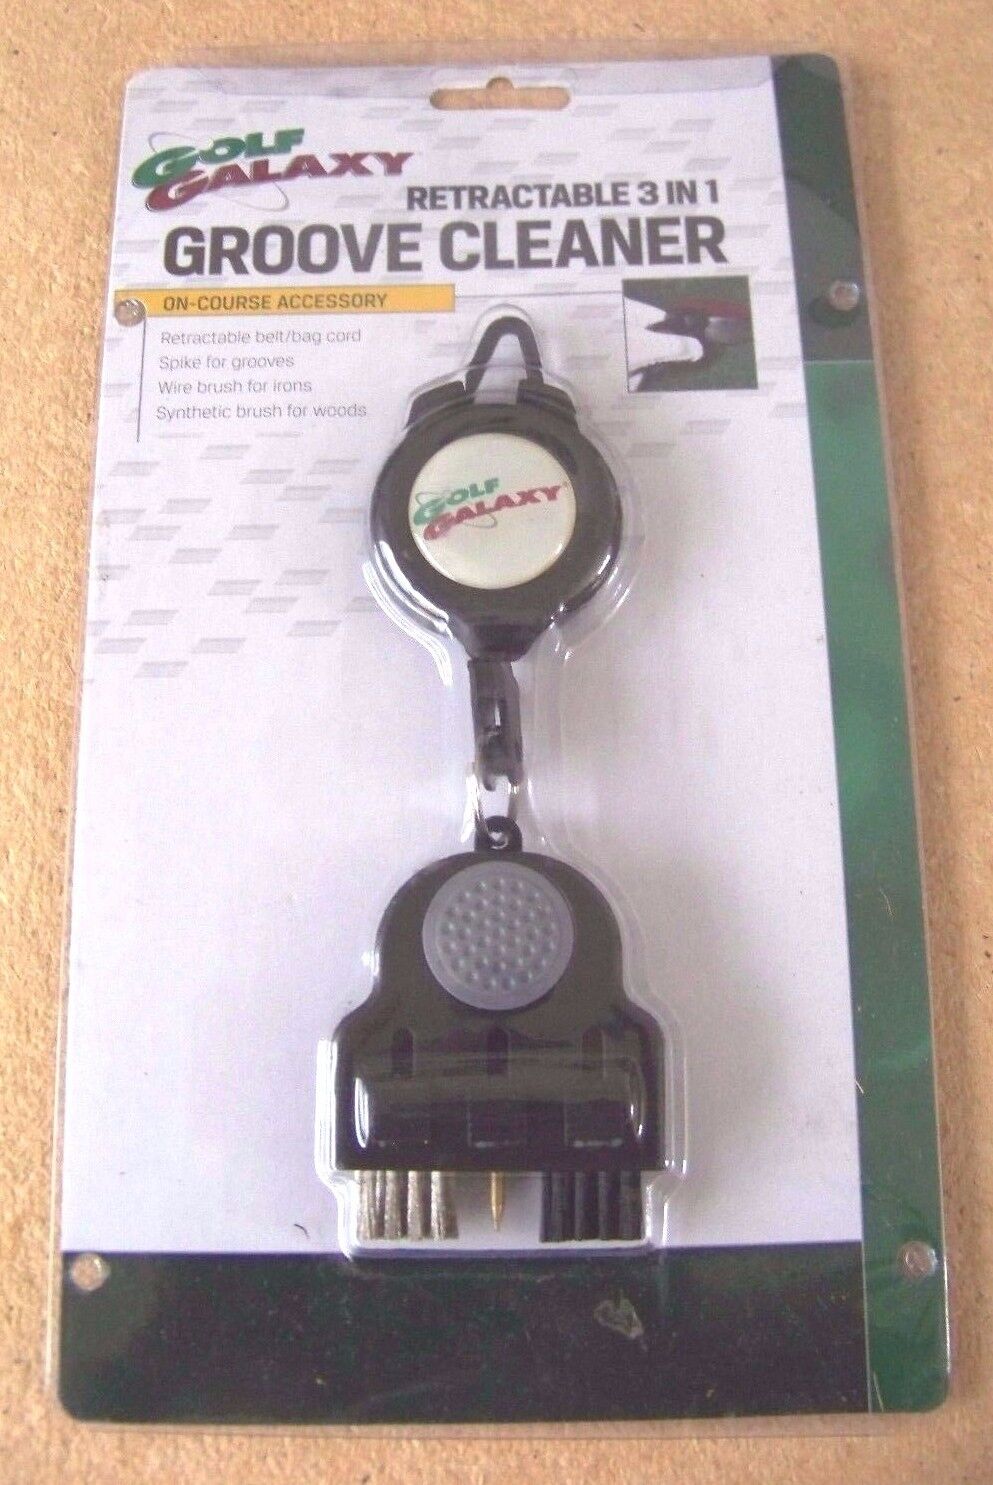 Golf Galaxy retractable 3 in 1 Groove Cleaner on-course accessory for club clubs